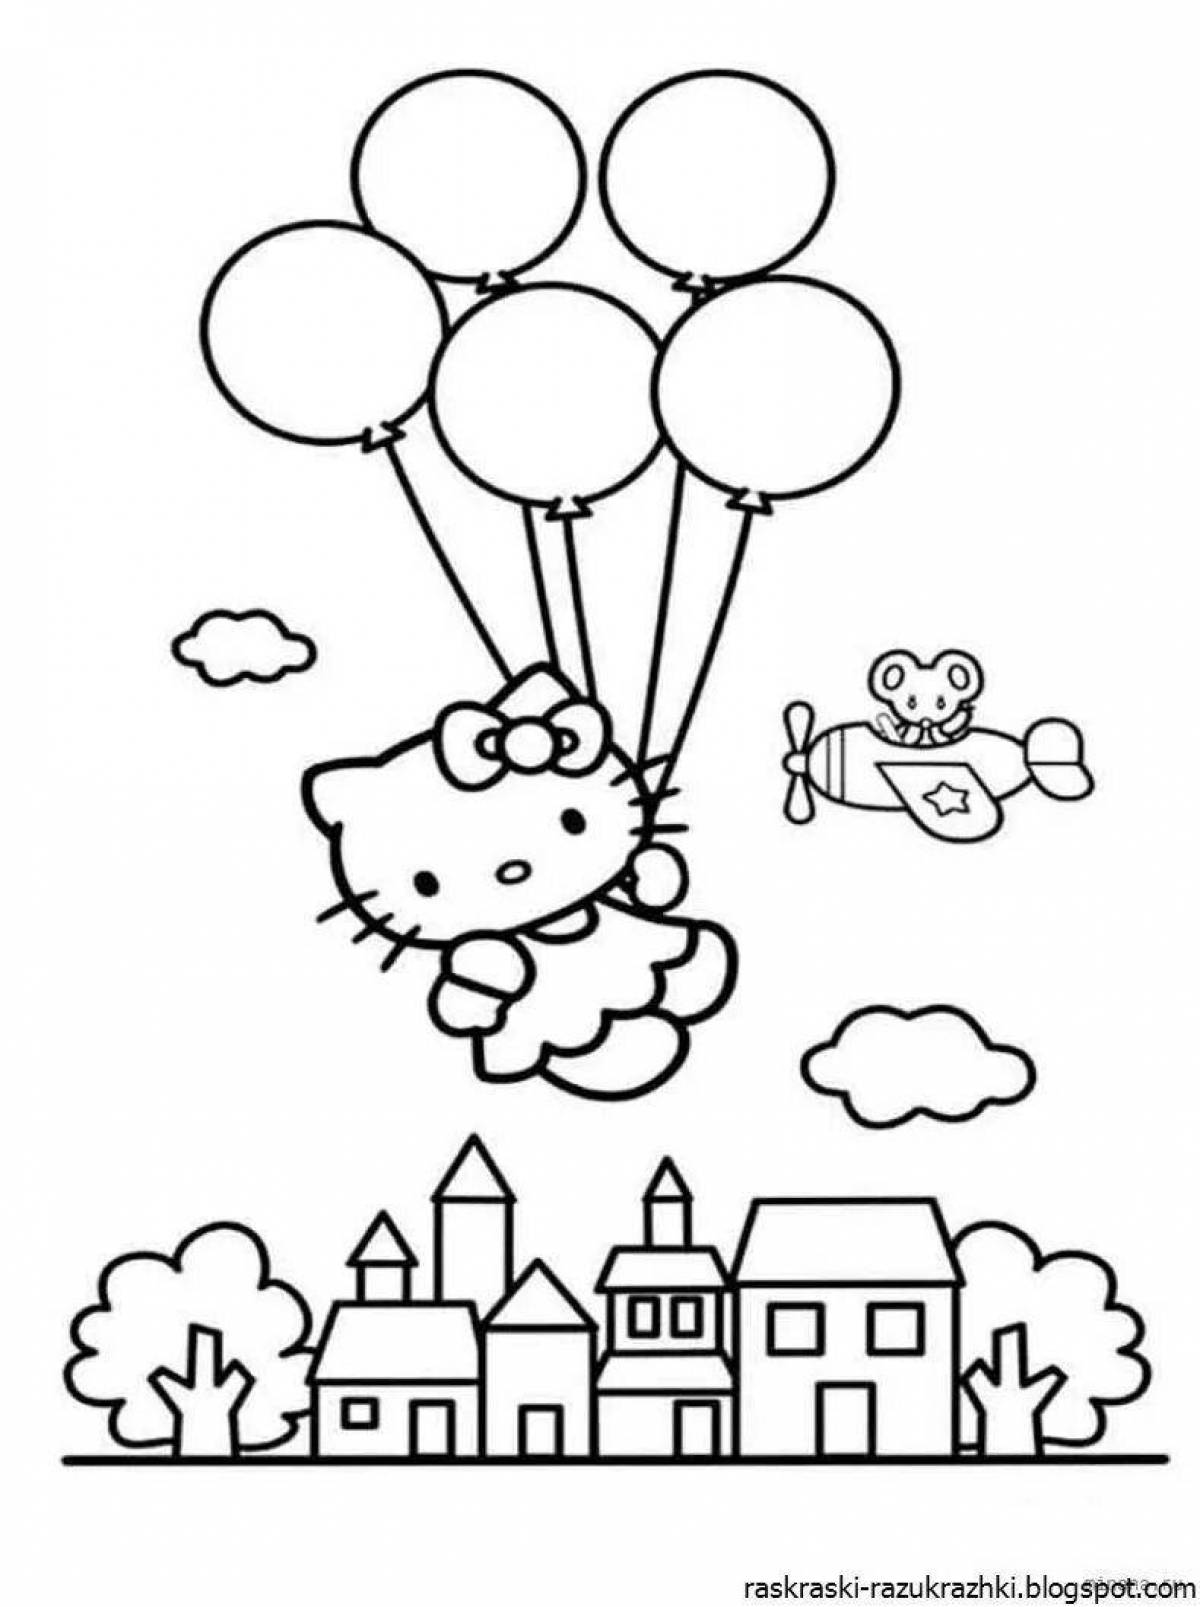 Colorful balloons for children 2-3 years old